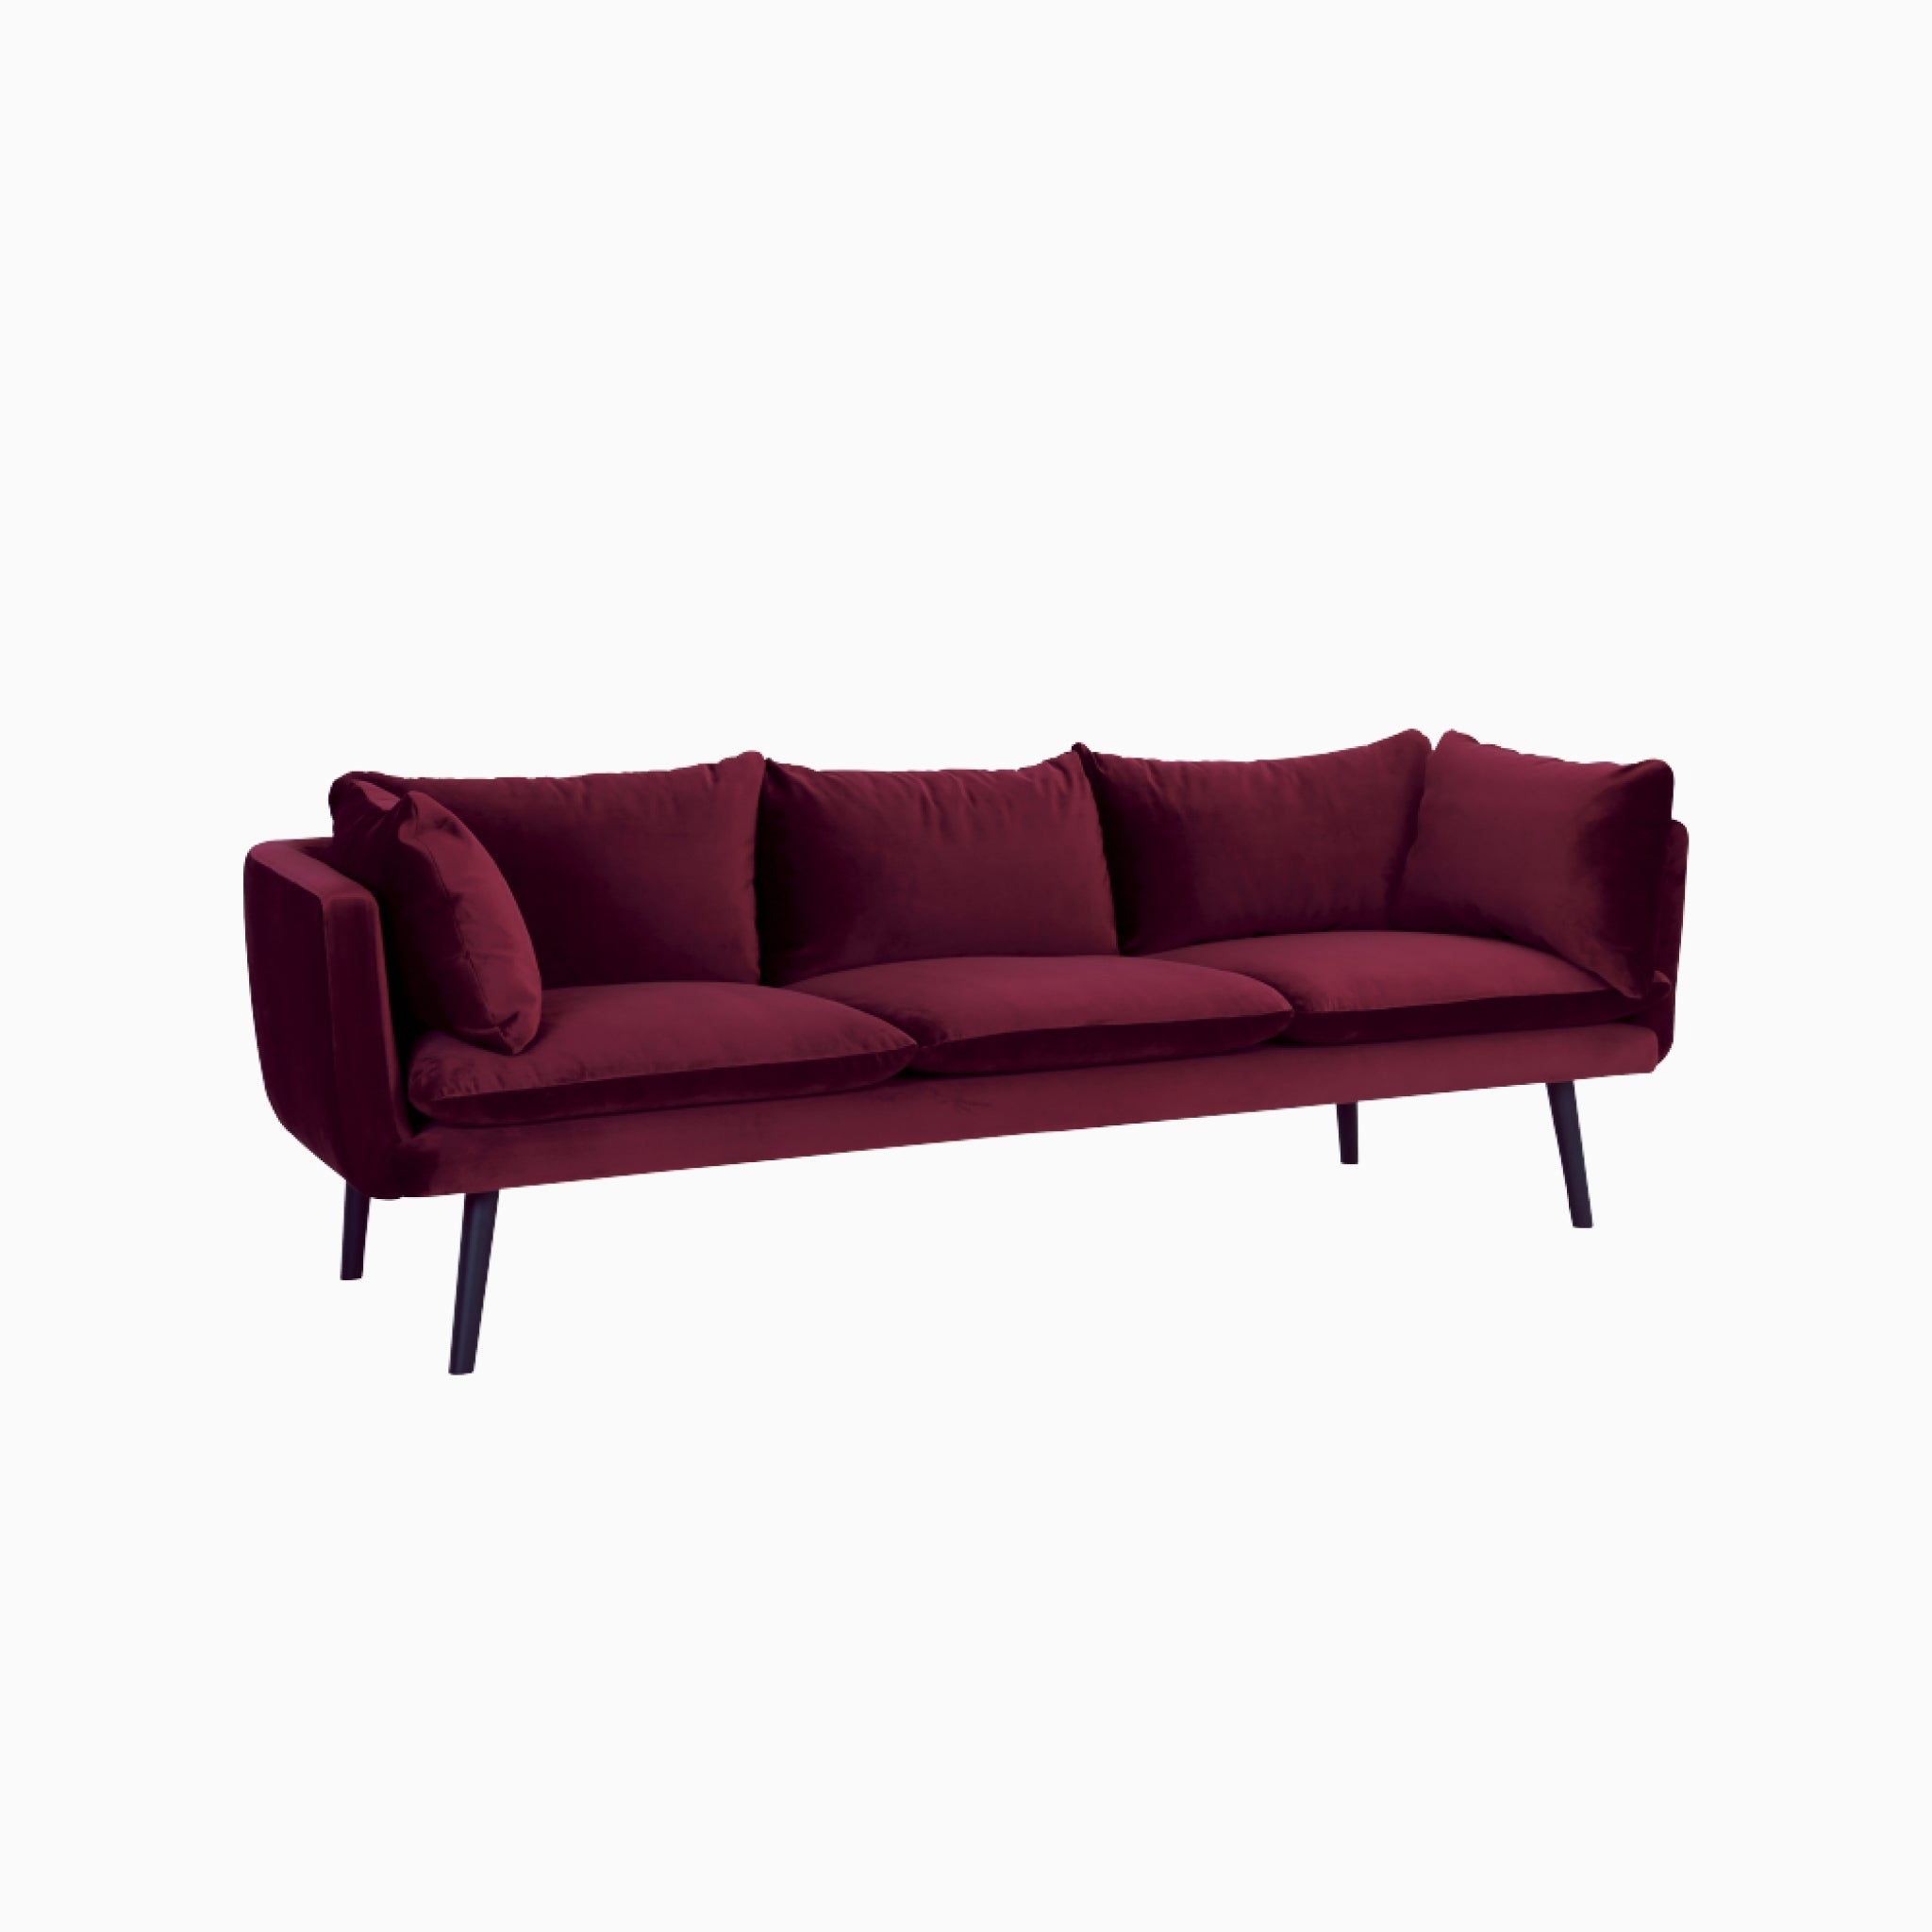 Nord 3 Seater Sofa with Saxony Fabric